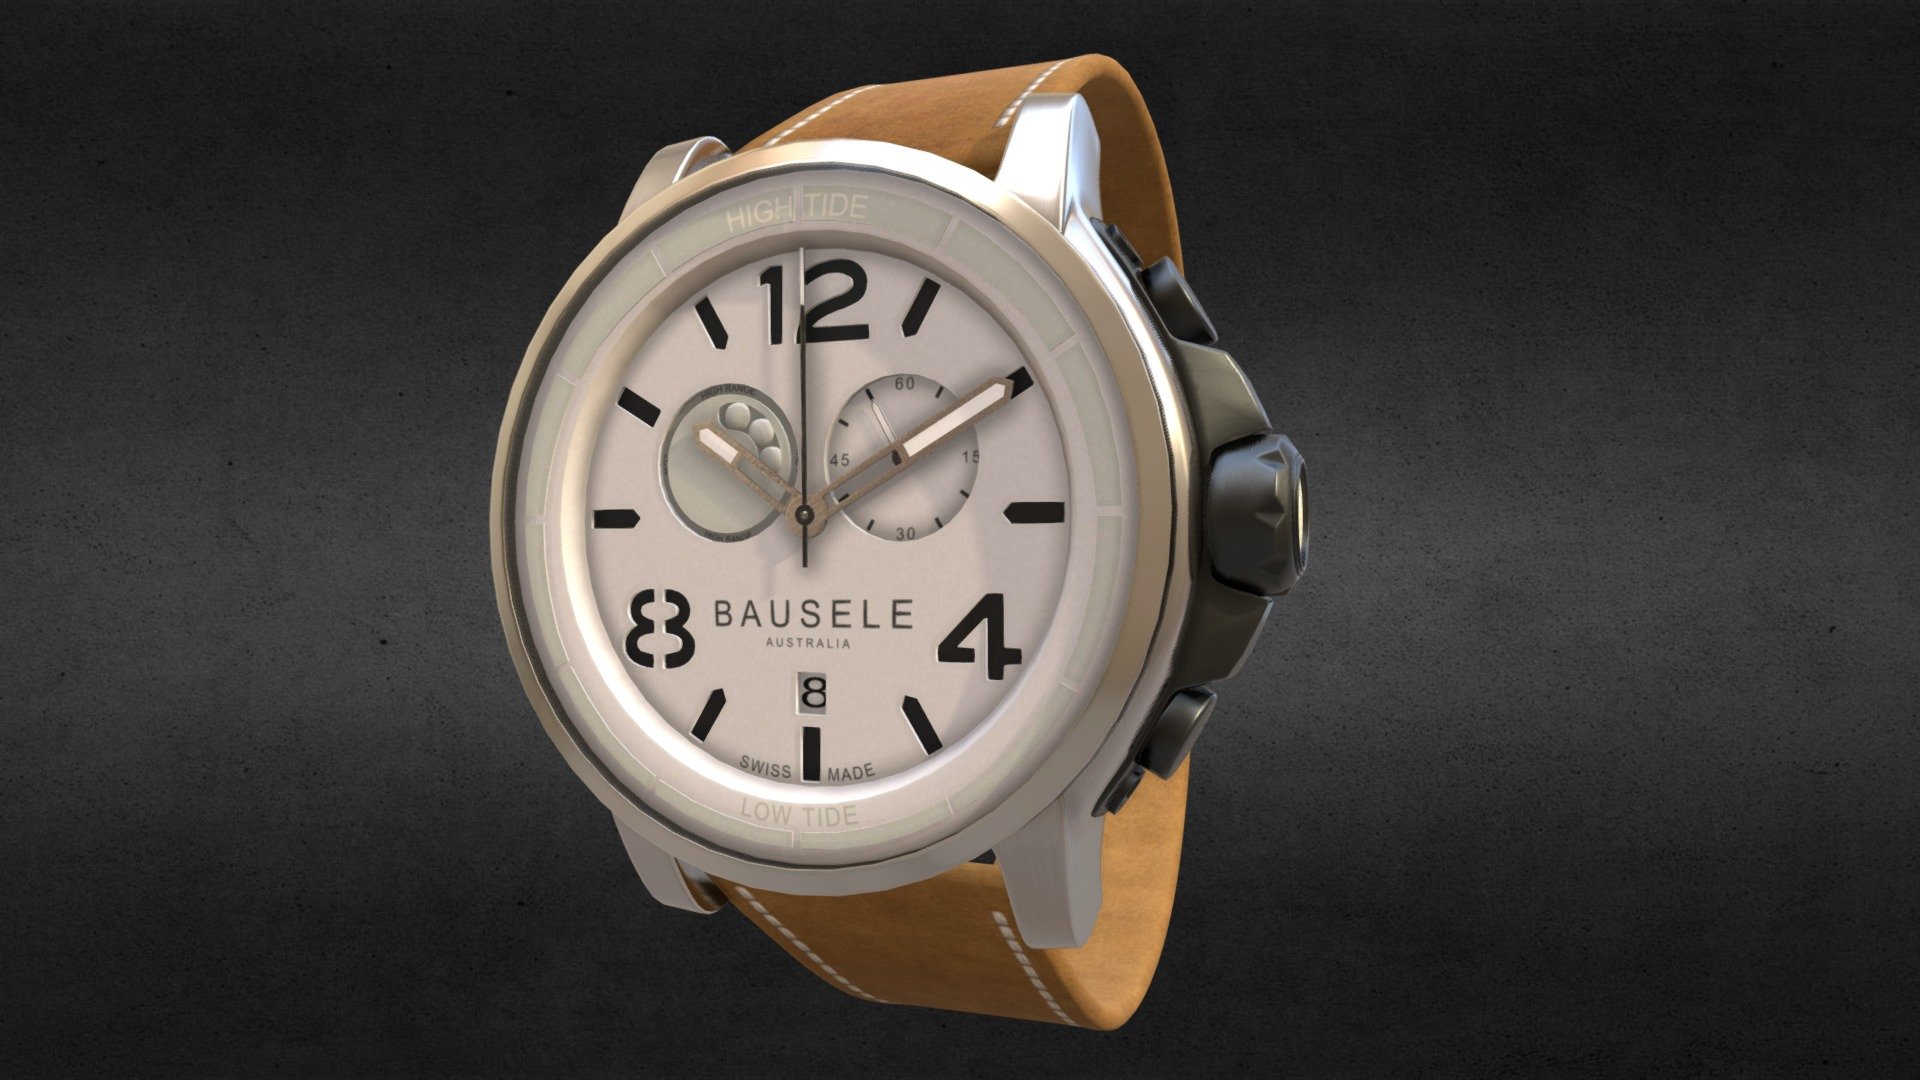 Awesome stainless steel Bausele Oceanmoon  watch with leather strap.
Use for Unreal Engine 4 and Unity3D. Try in augmented reality in the AR-Watches app. 
Links to the app: Android, iOS

Currently available for download in dae format.

3D model developed by AR-Watches

Disclaimer: We do not own the design of the watch, we only made the 3D model 3d model